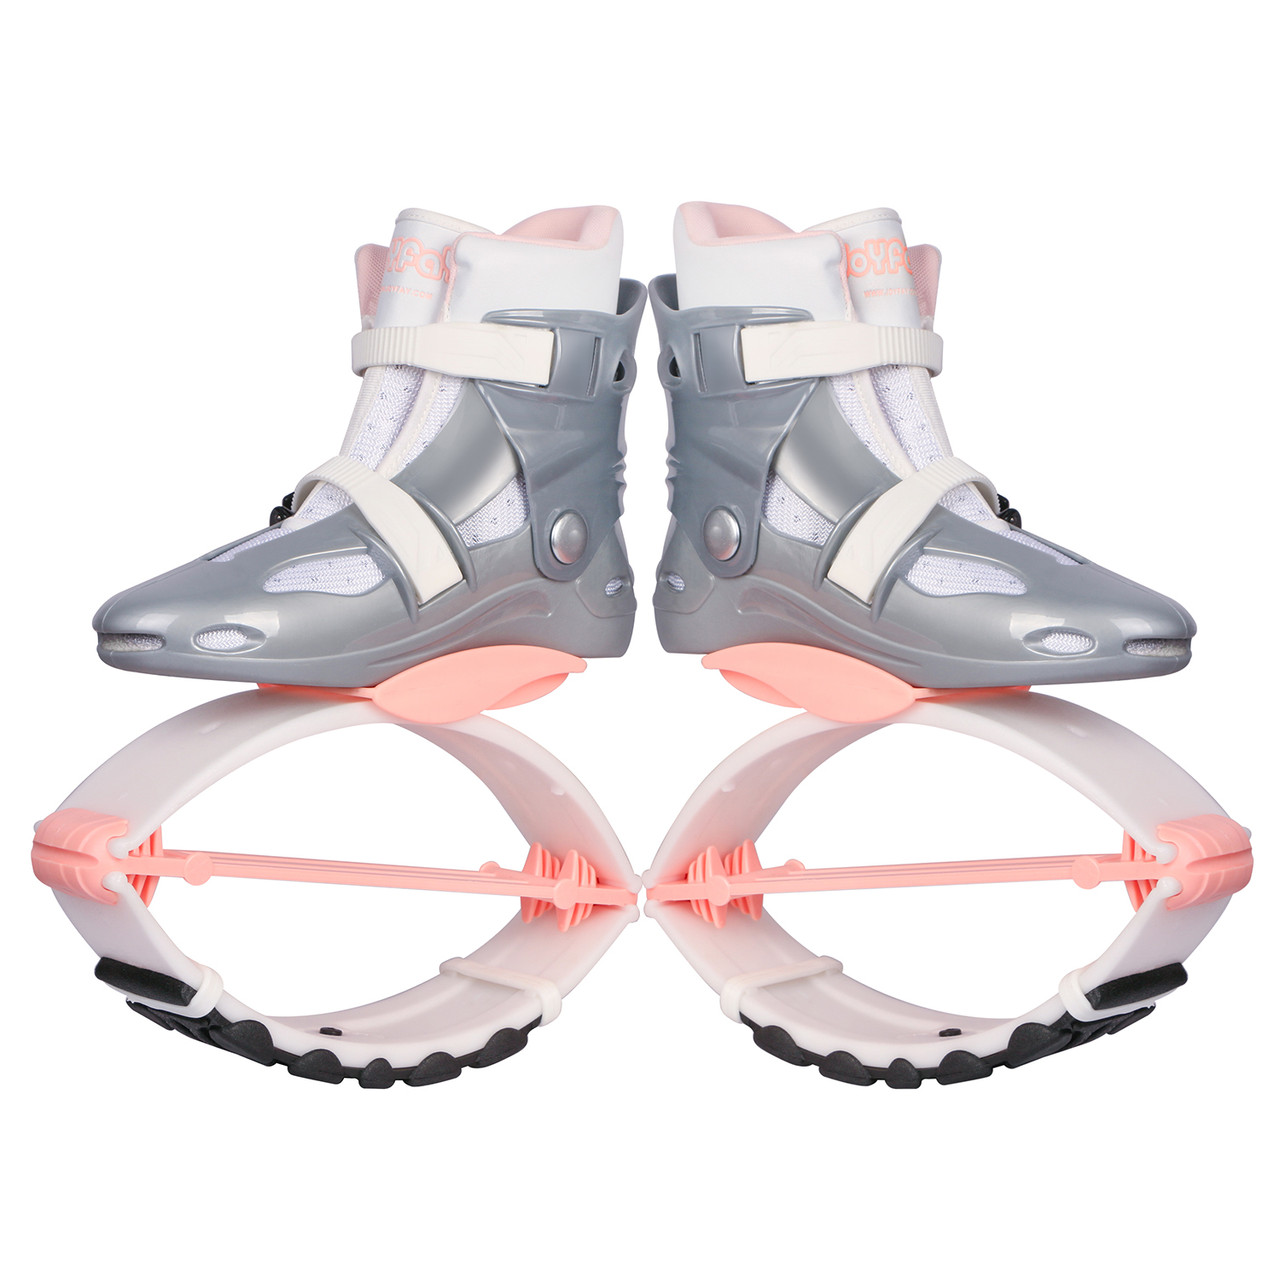 JOYFAY White and Pink Jumping Shoes- Unisex Fitness Jump Shoes